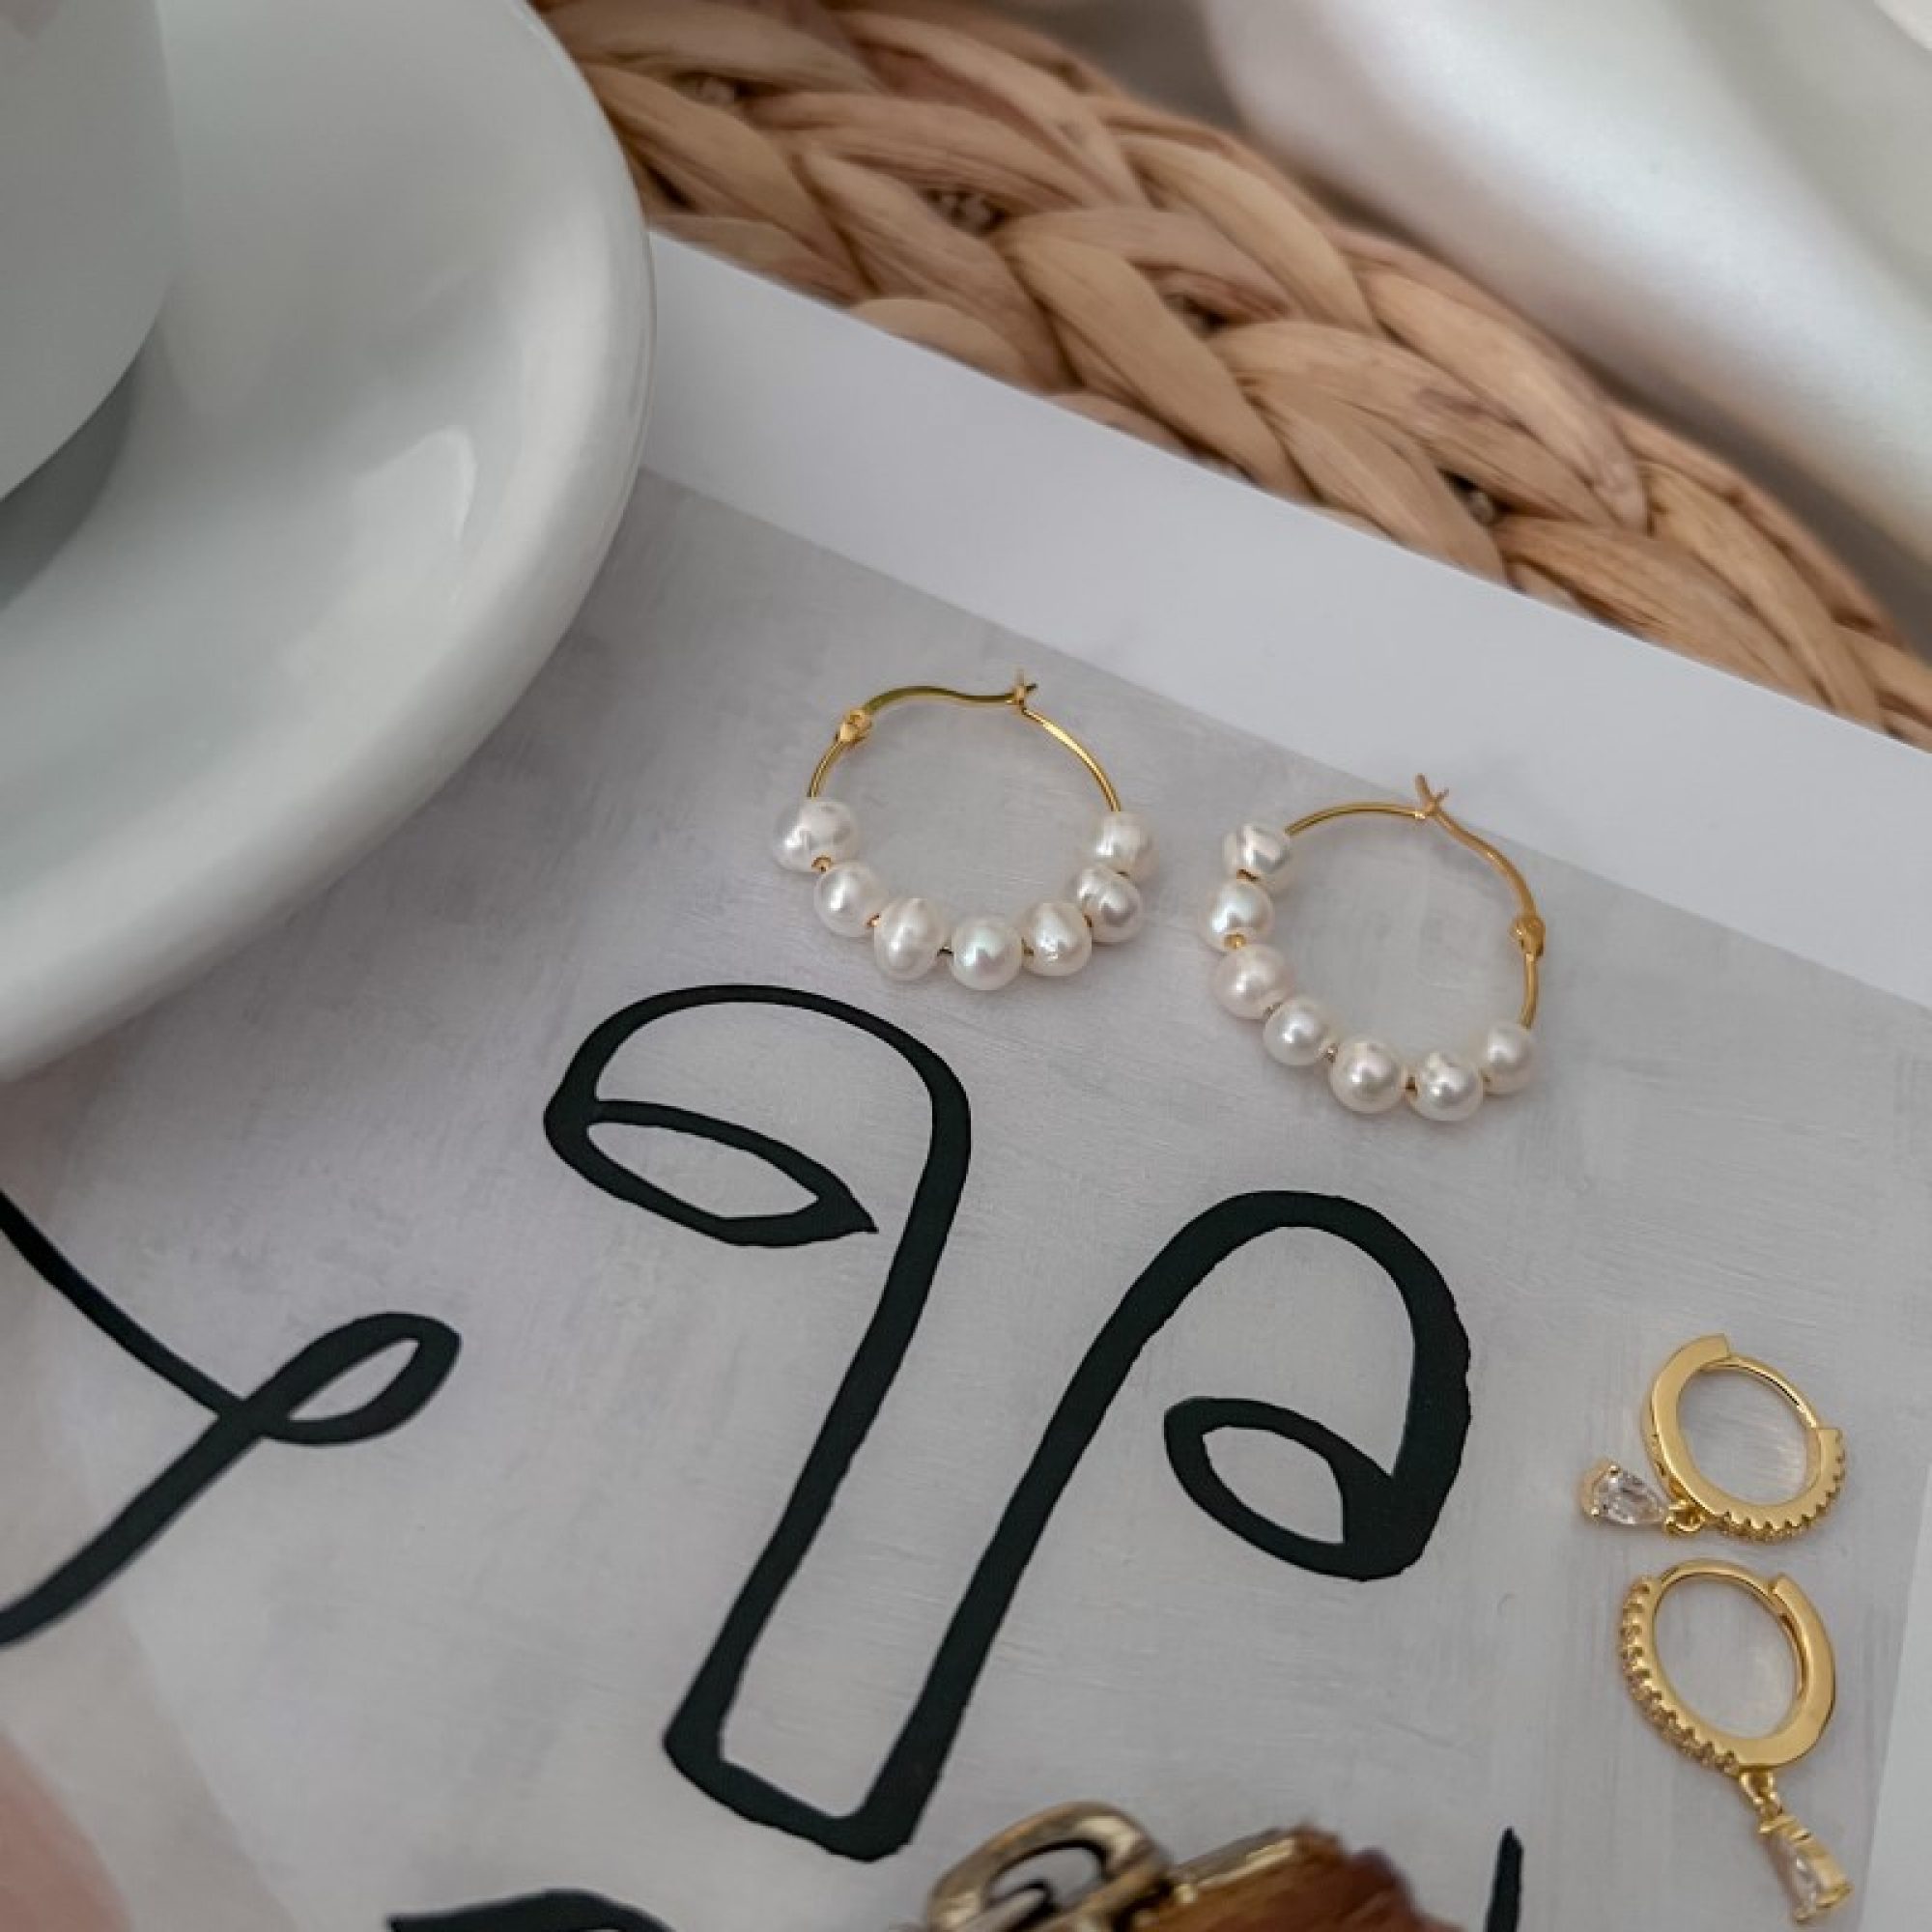 Gold plated earrings with real pearls